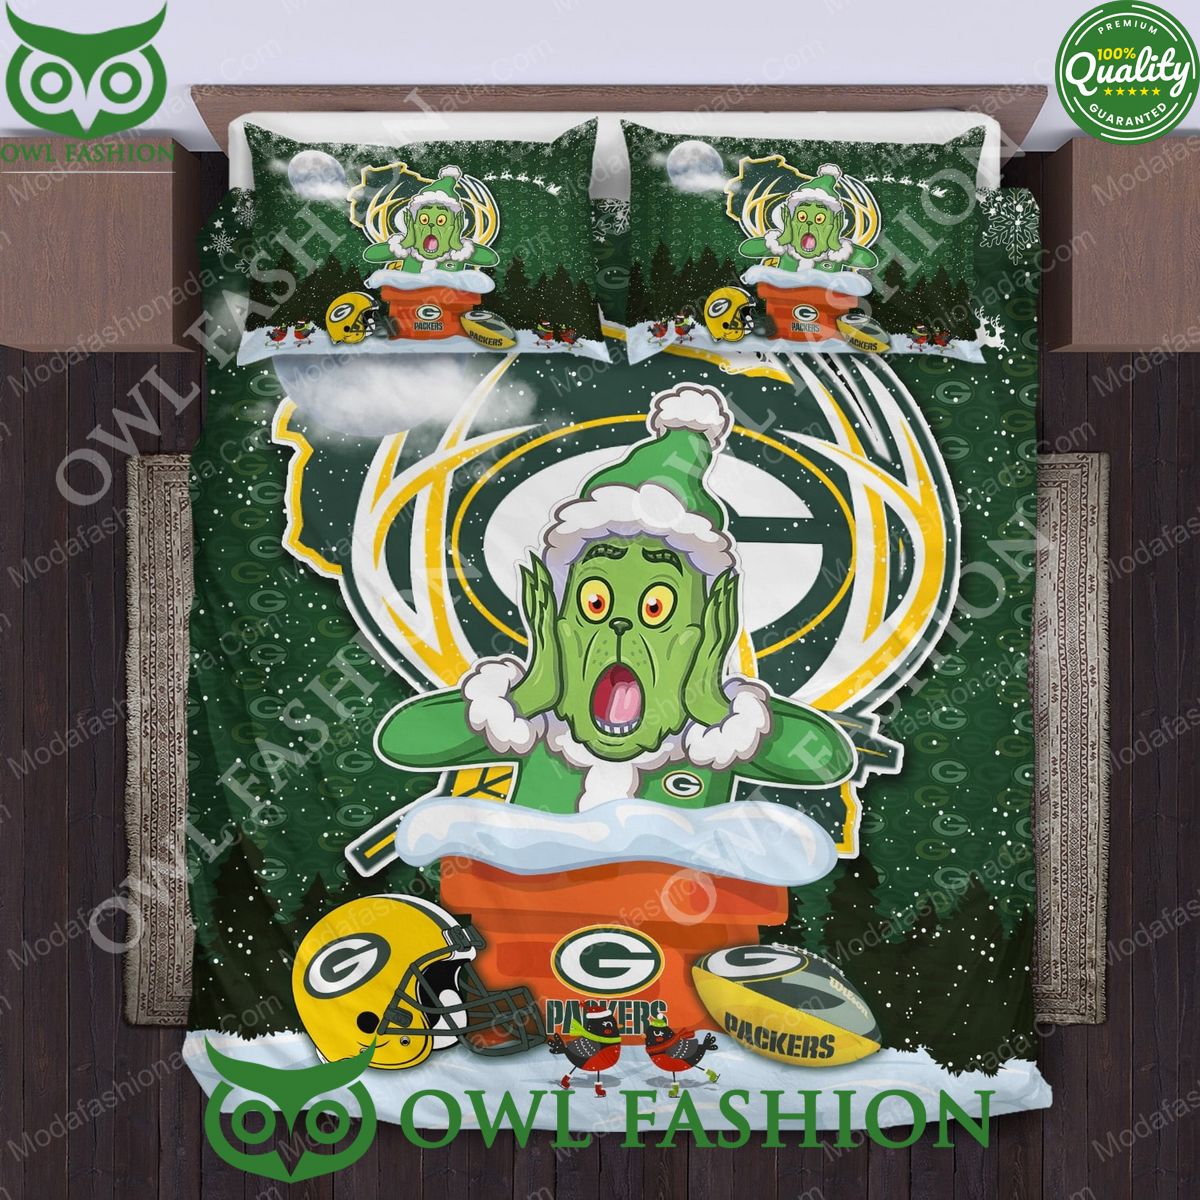 The Grinch NFL Green Bay Packers Christmas Bedding Sets